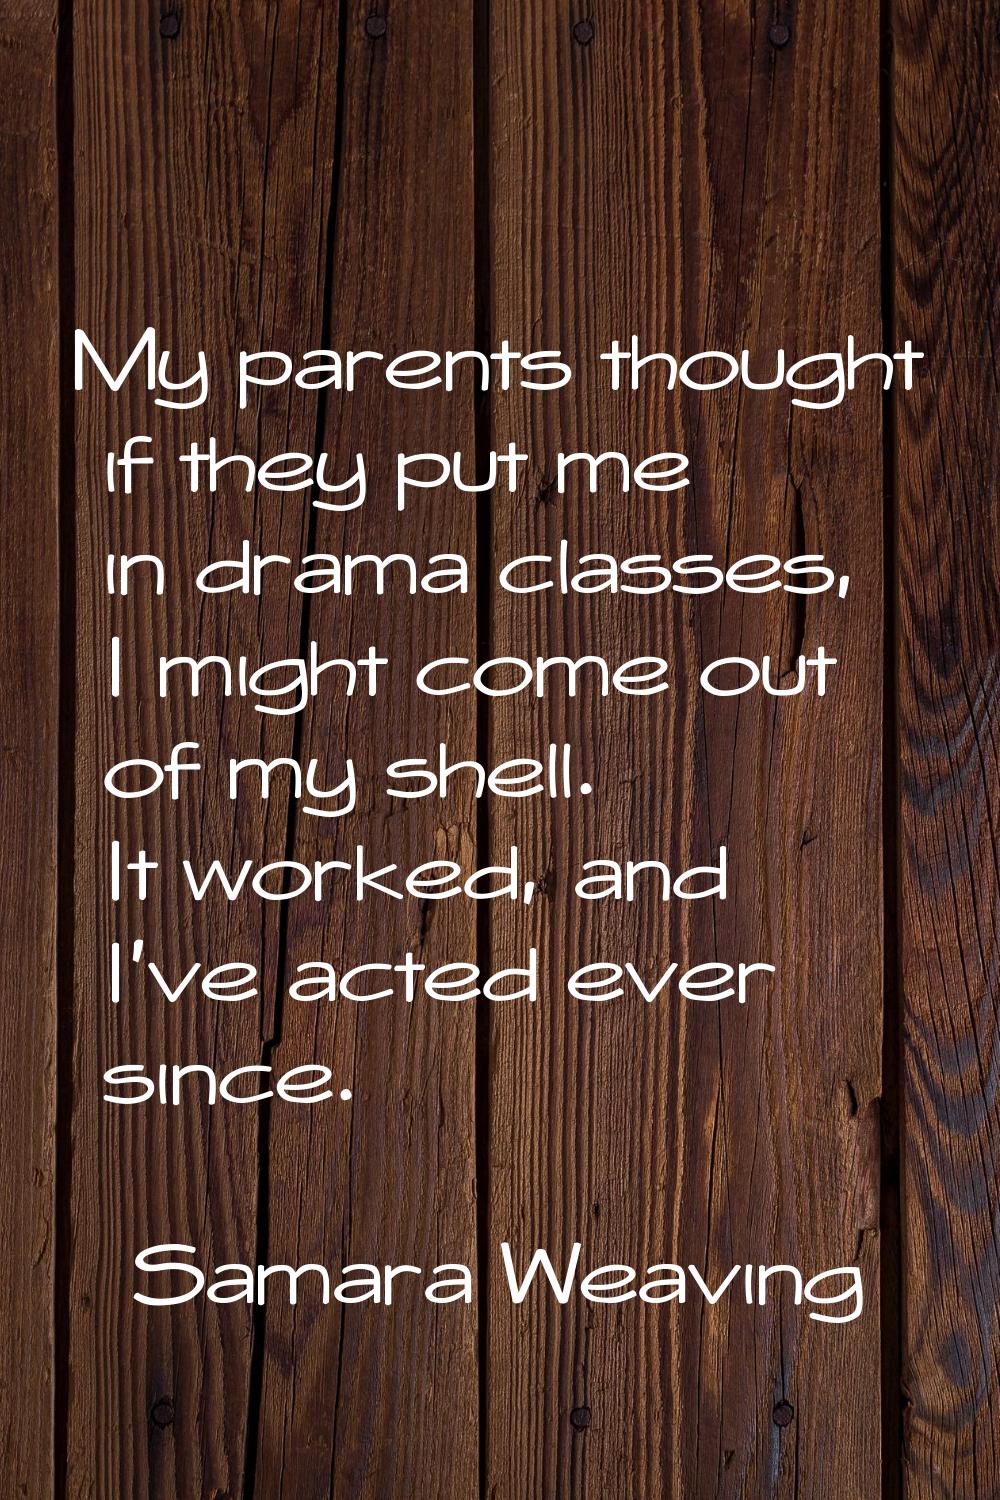 My parents thought if they put me in drama classes, I might come out of my shell. It worked, and I'